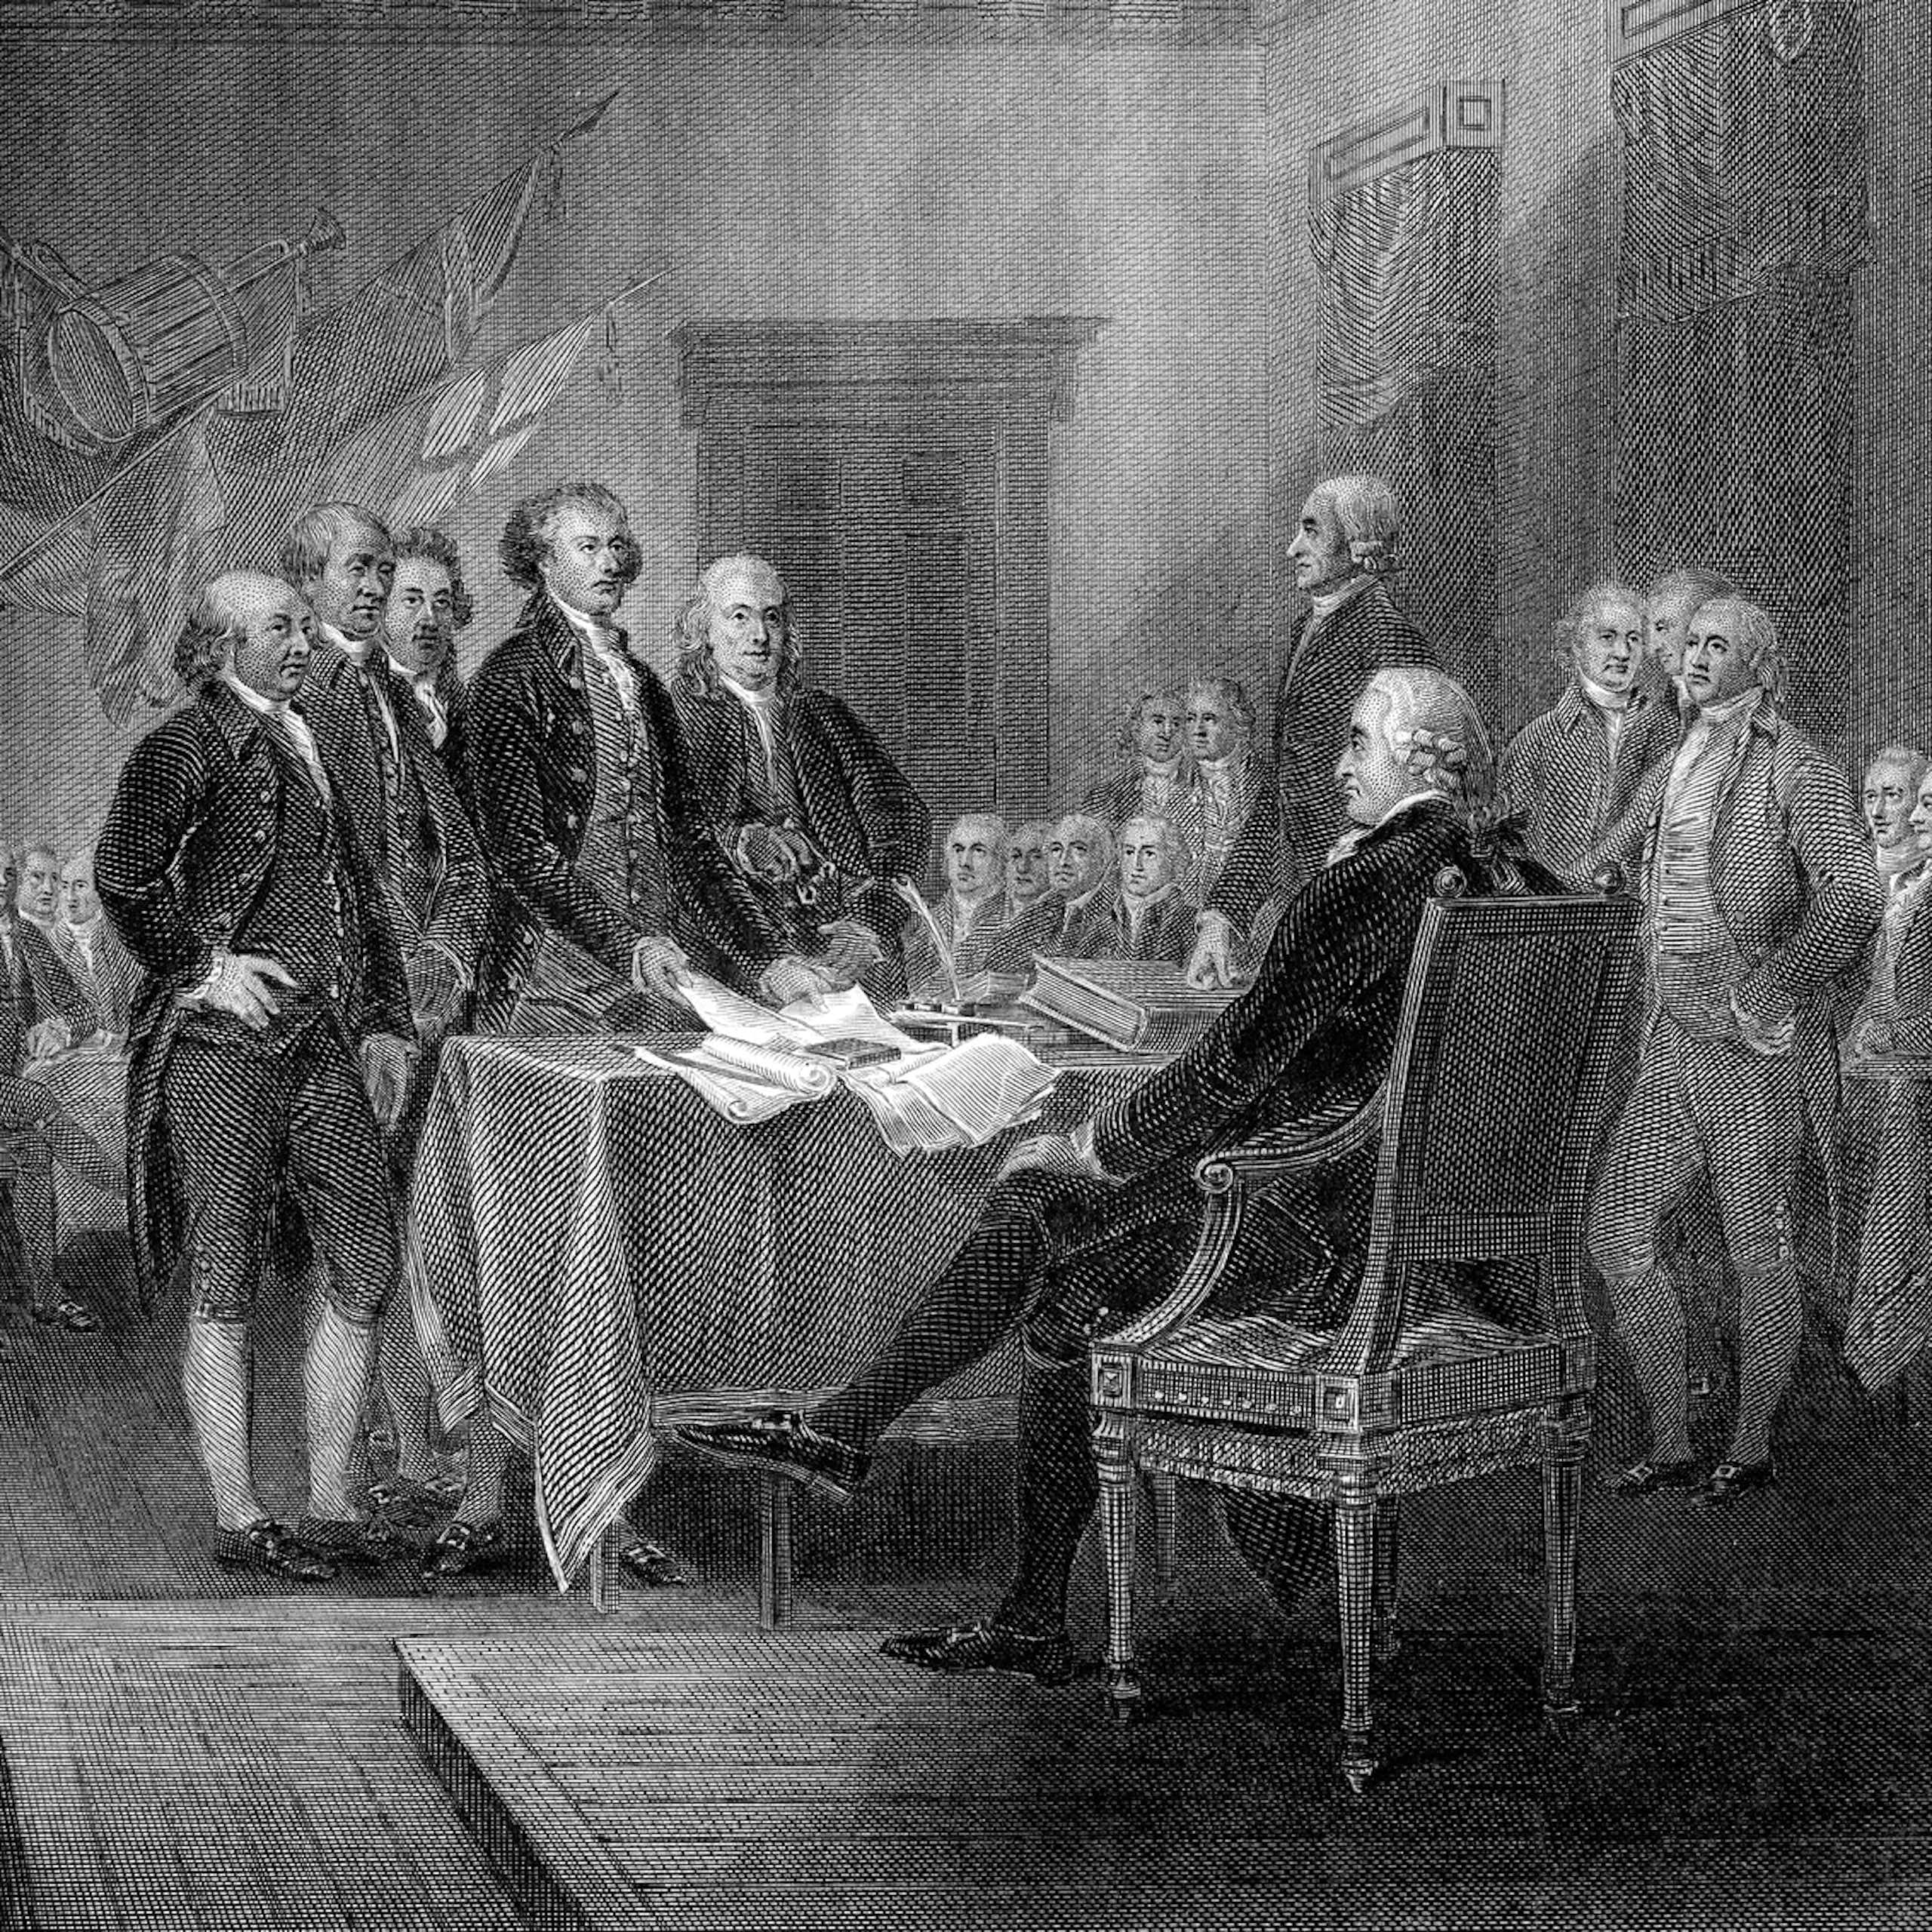 A steel engraving shows the Second Continental Congress adopting the Declaration of Independence on July 4, 1776.